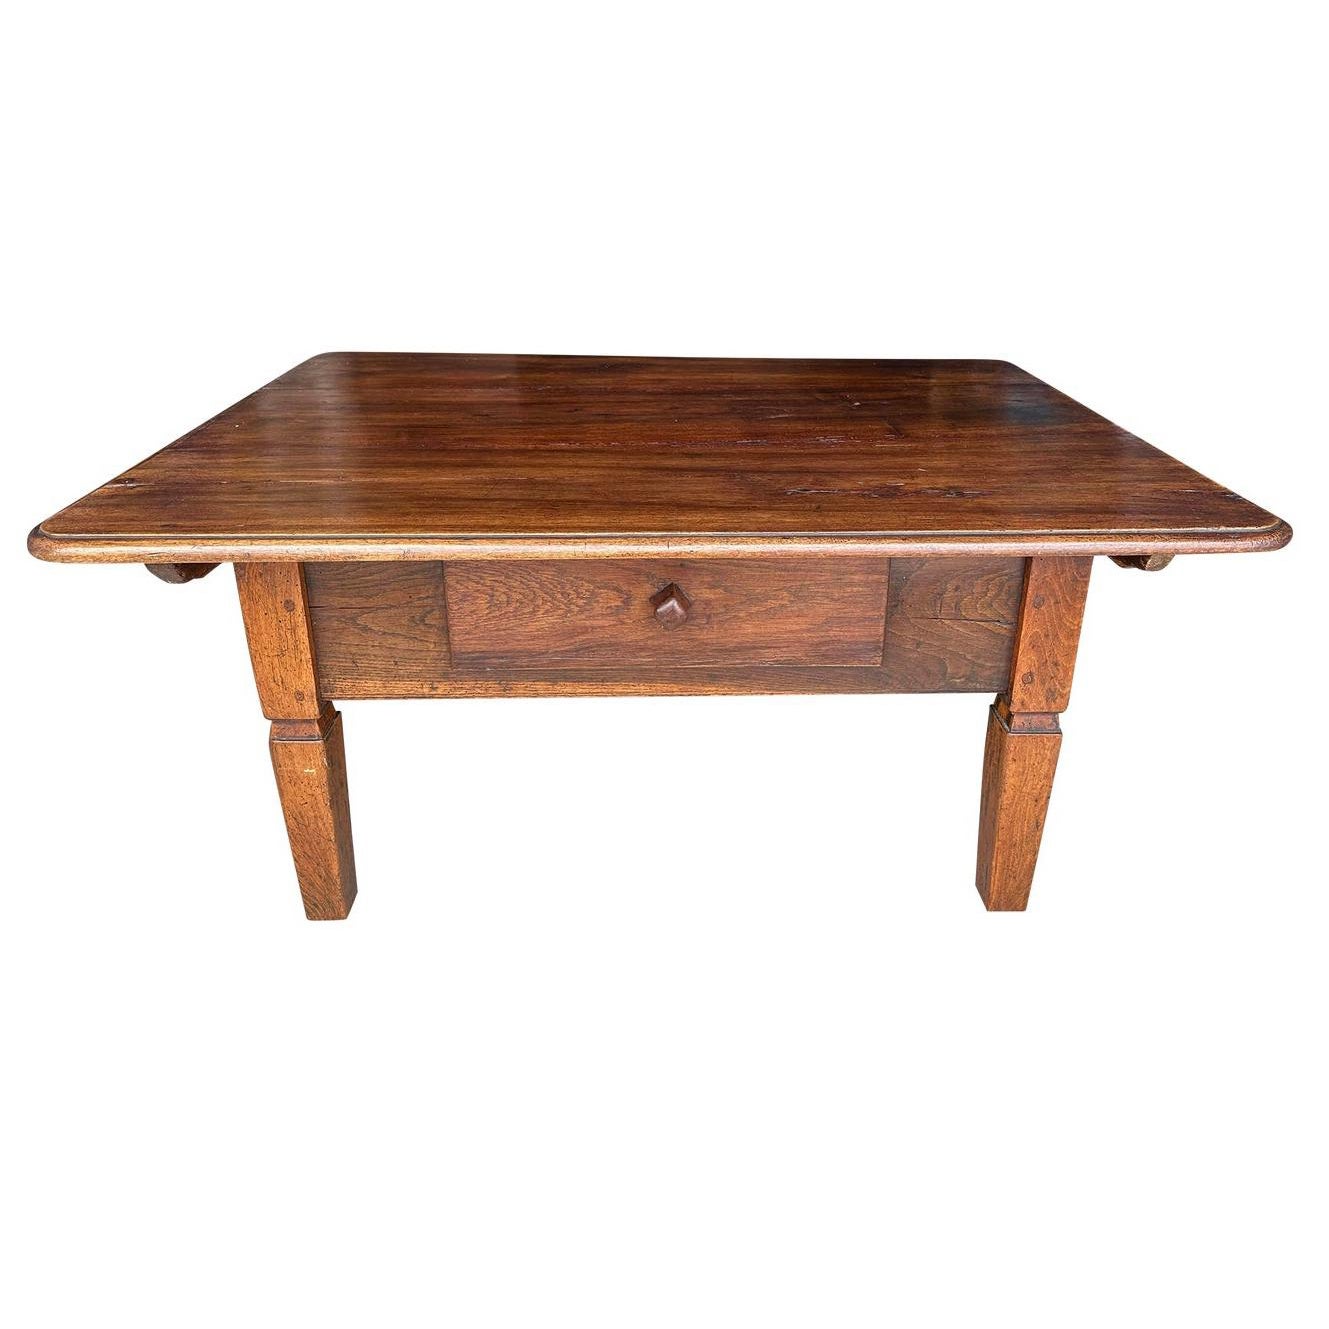 Rustic Antique Coffee Table For Sale